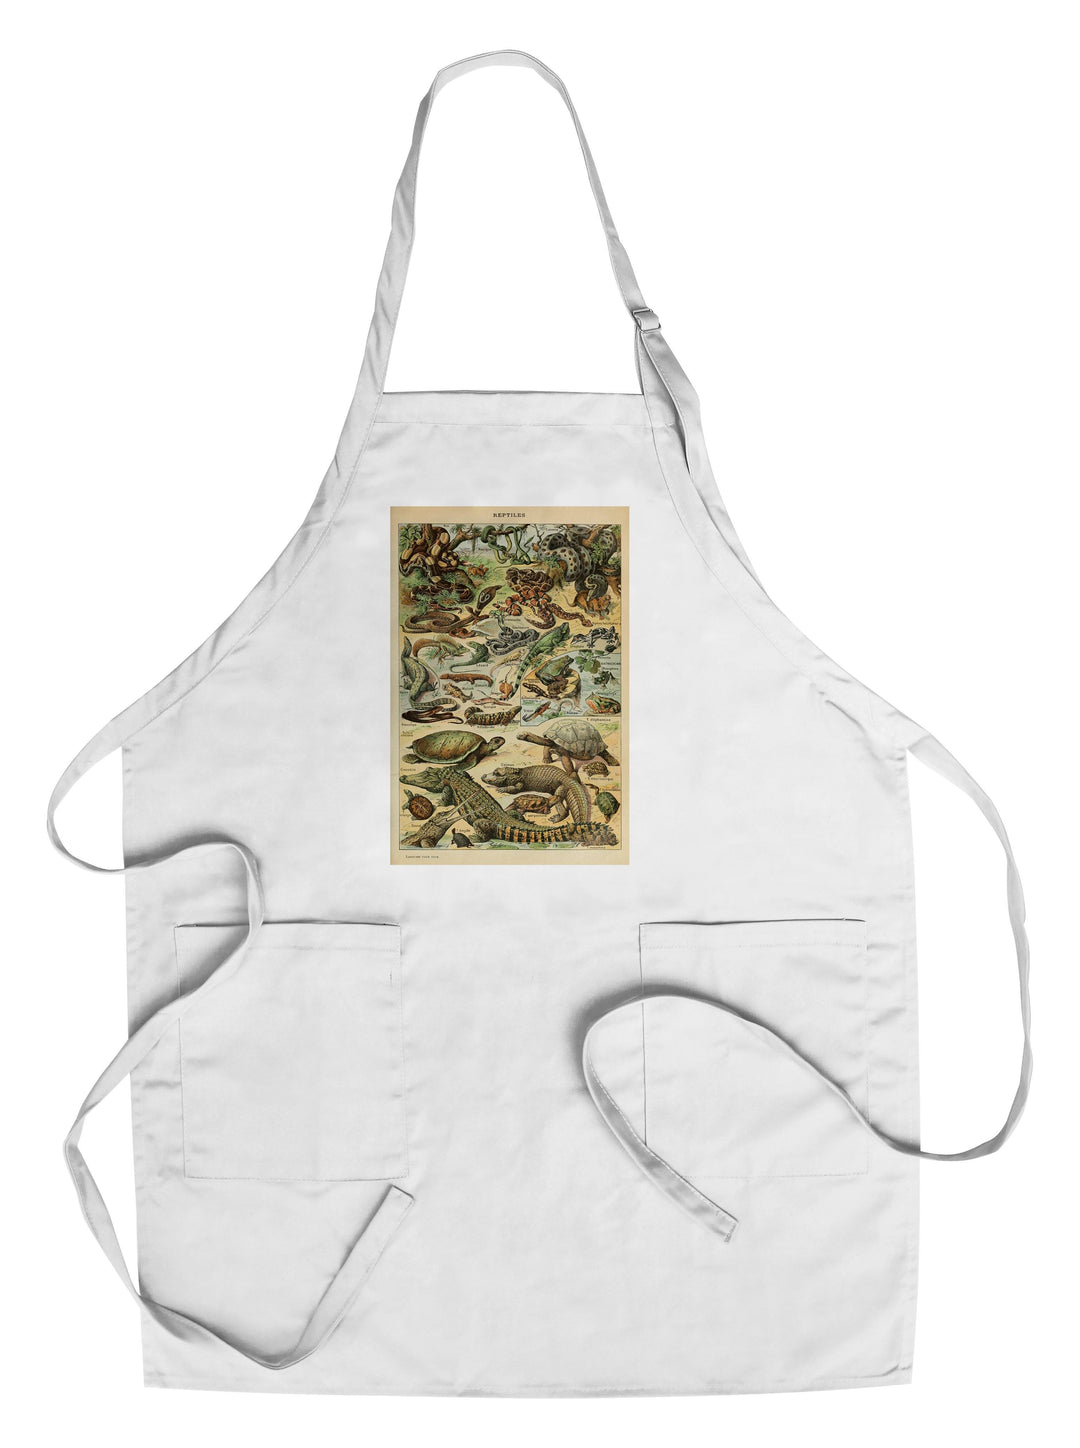 Reptiles, B, Vintage Bookplate, Adolphe Millot Artwork, Towels and Aprons Kitchen Lantern Press Chef's Apron 